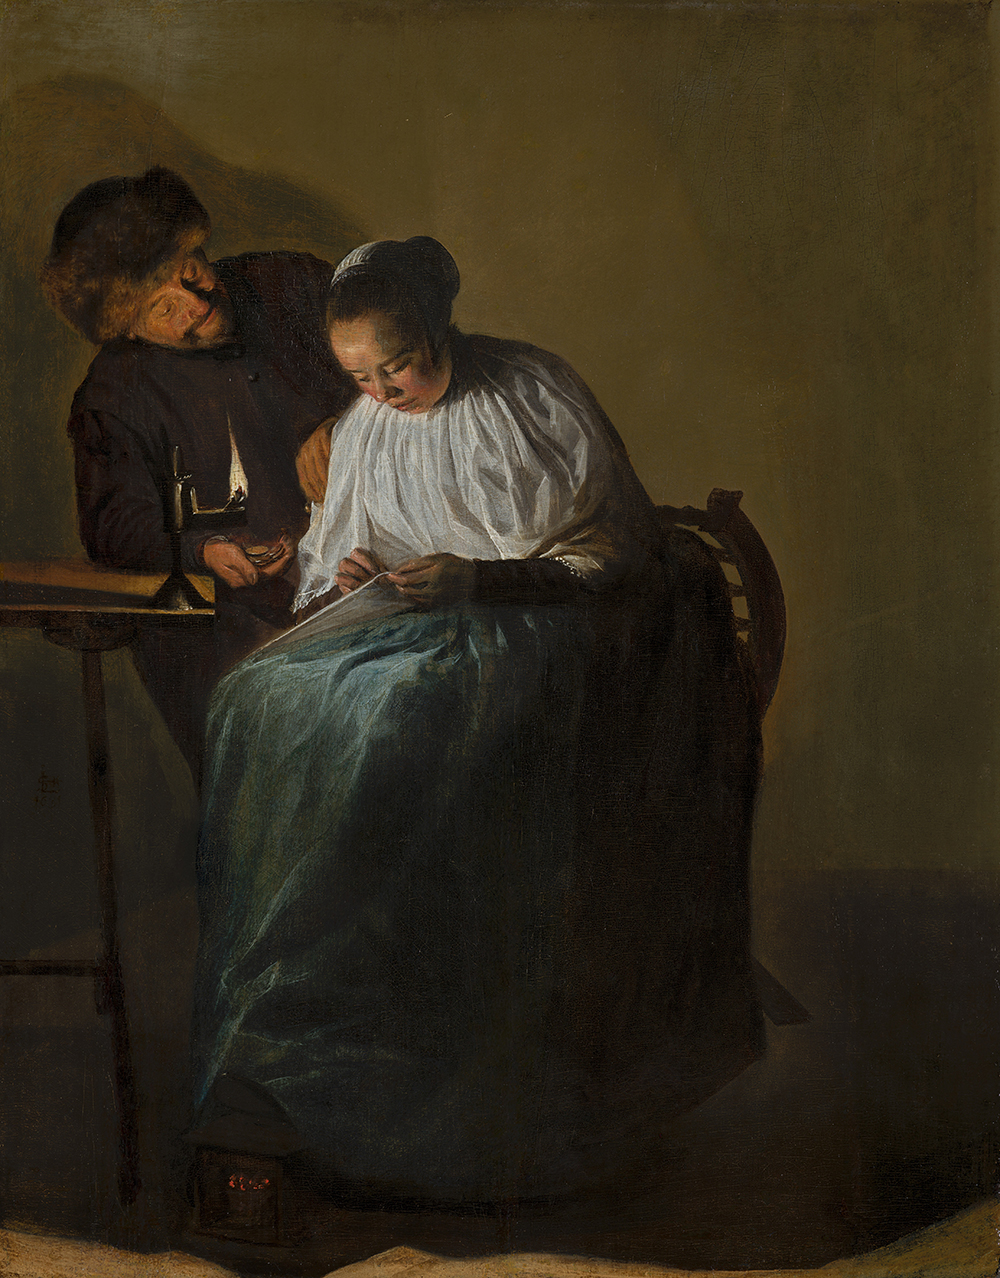 Man Offering Money to a Young Woman, by Judith Leyster, 1631.